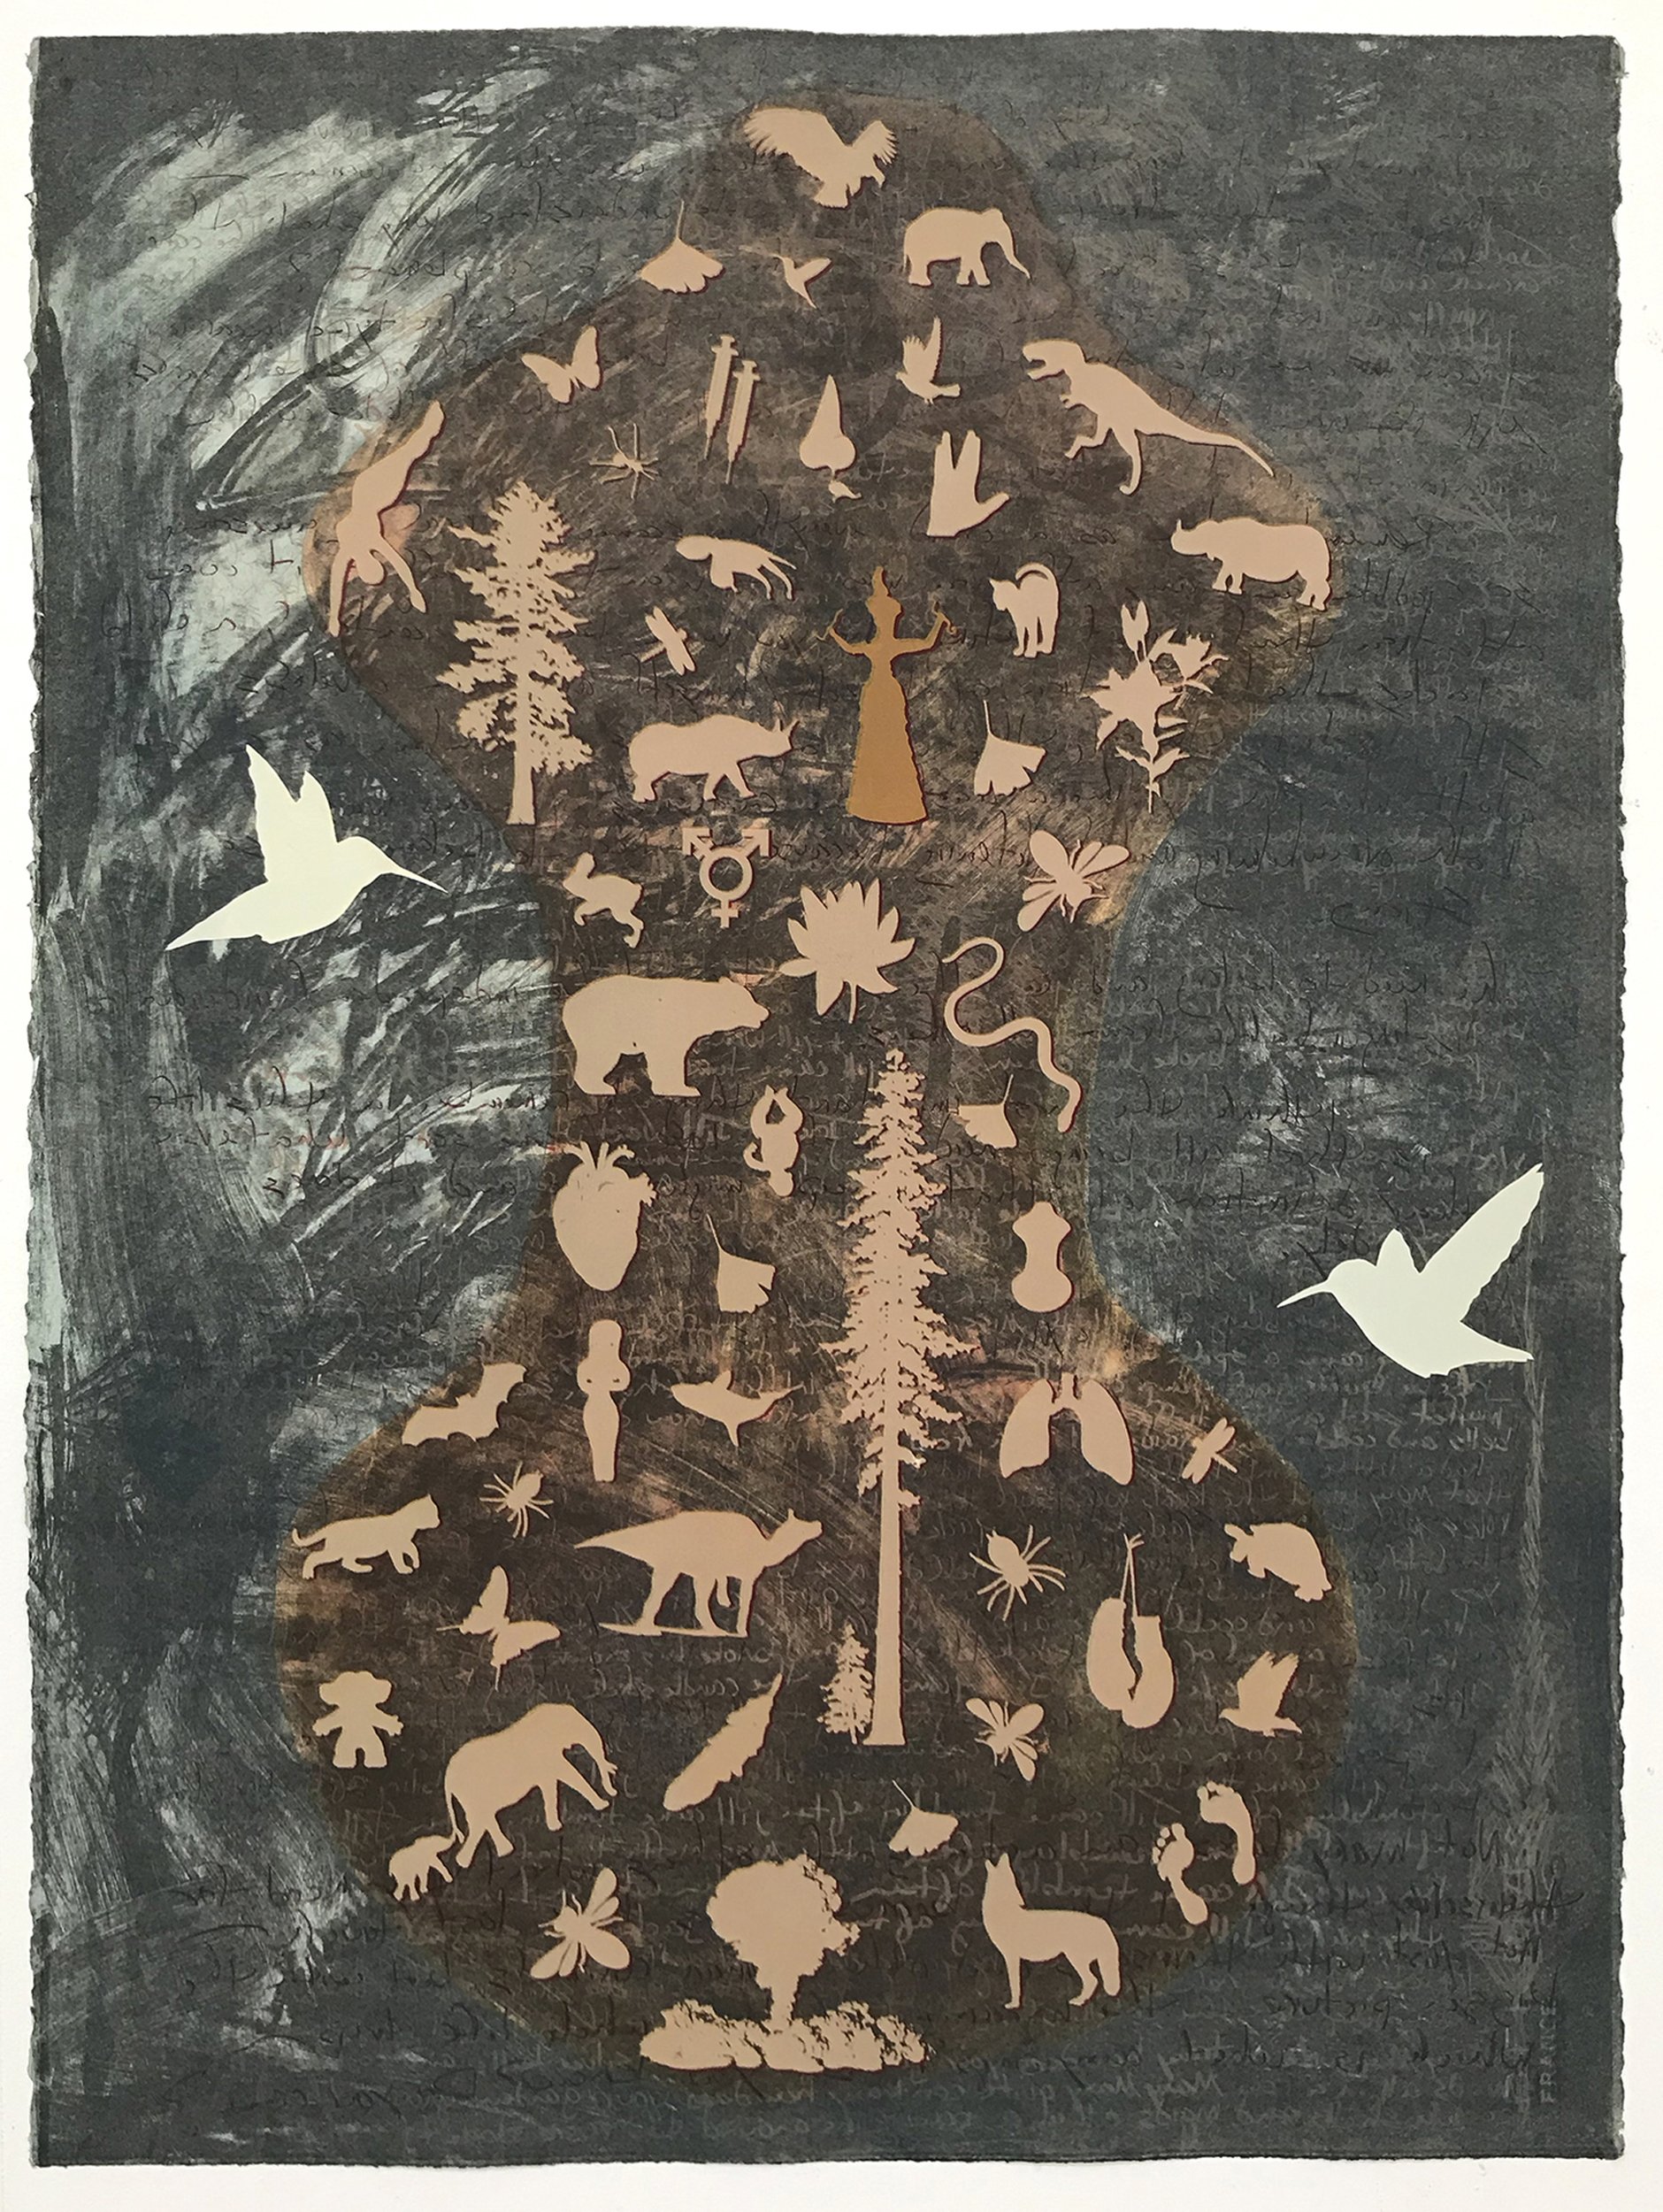  Nanette Wylde    Milagros for Times Like These I   Lithography, screenprinting, monotype 